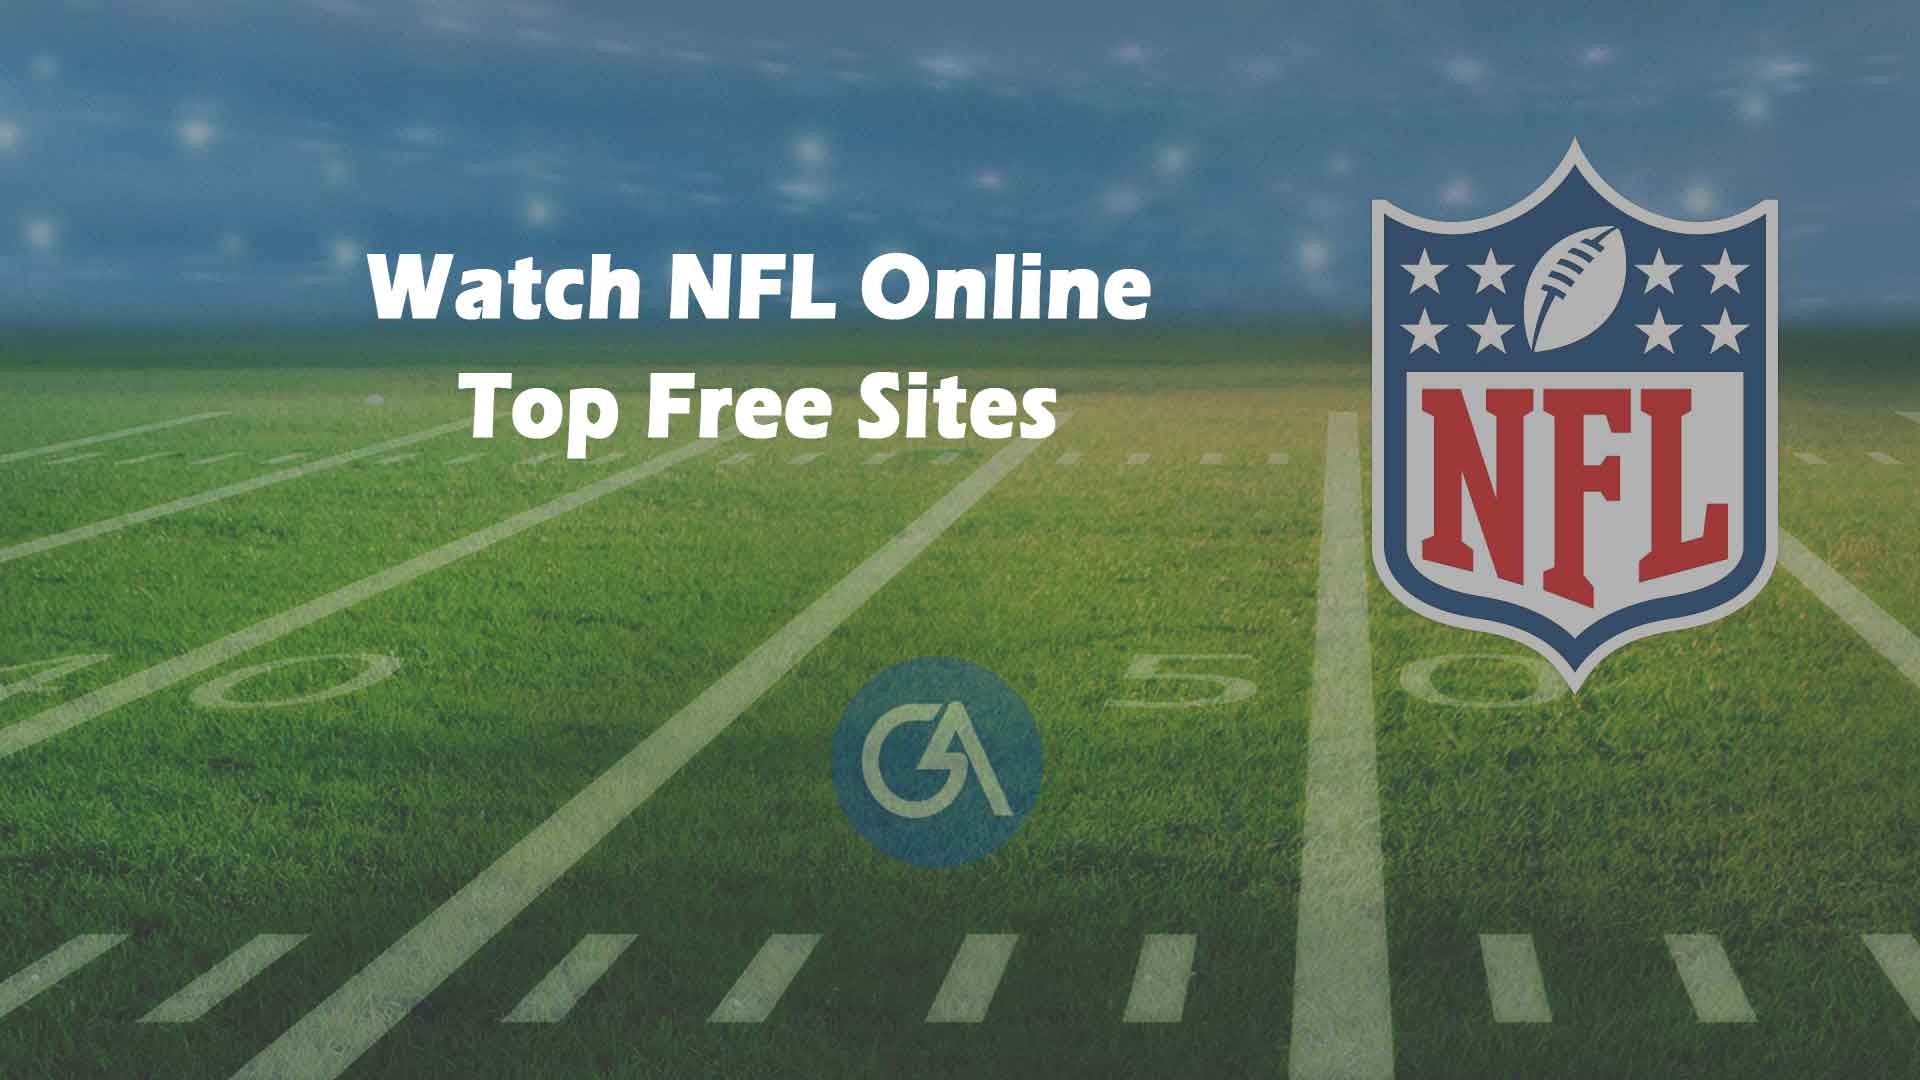 How can you watch NFL streams, even if you are out of your home country?